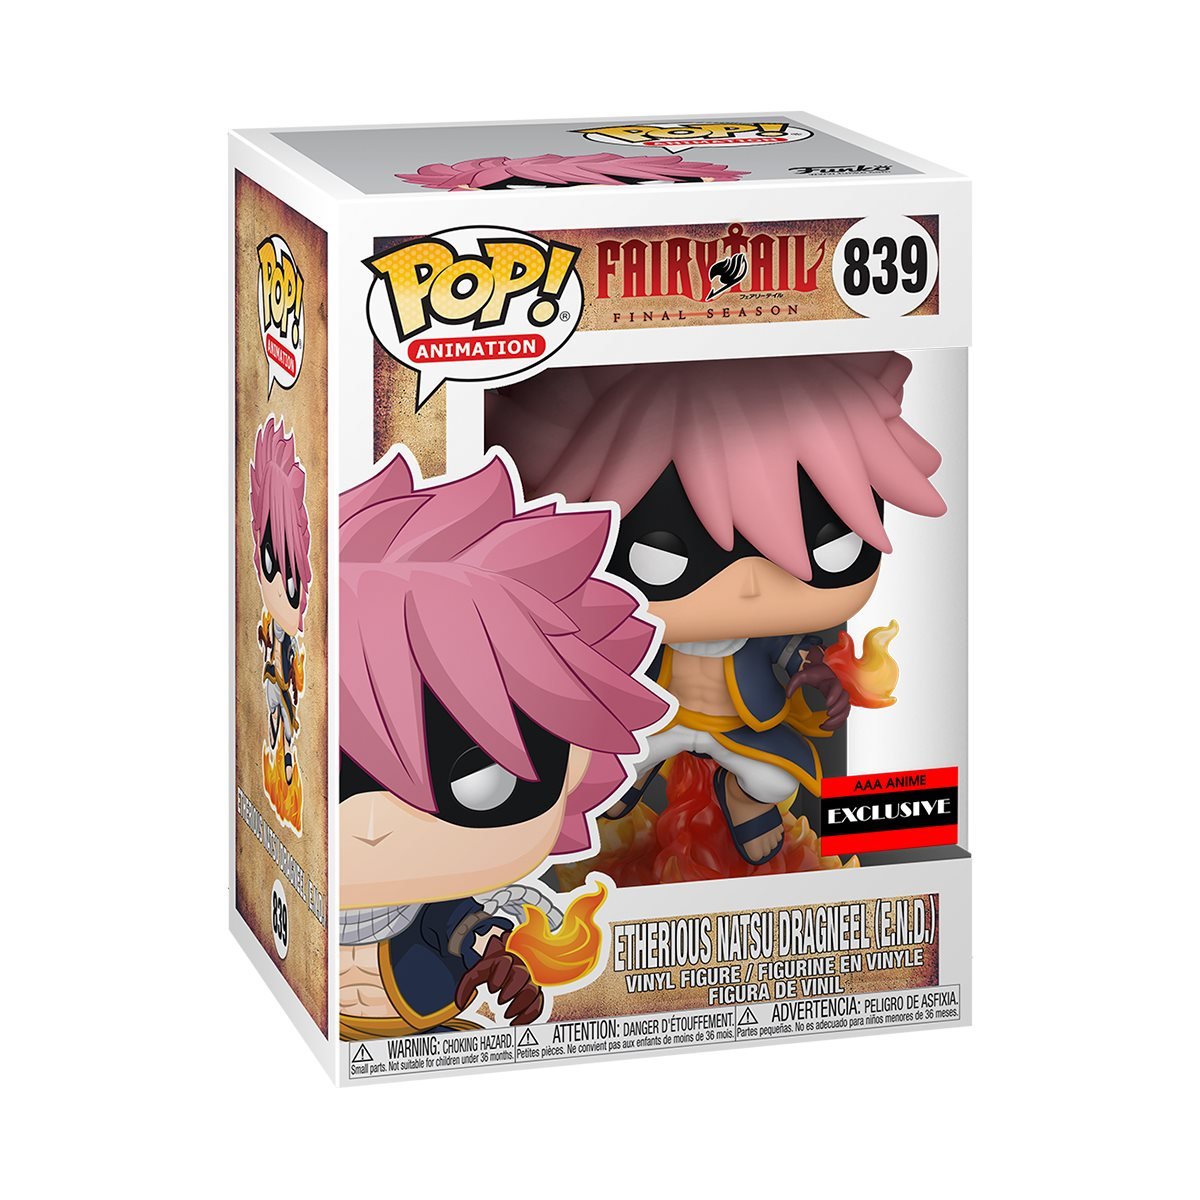 AAA Anime Protector include Funko Pop Fairy Tail Etherious Natsu Dragneel E.N.D 